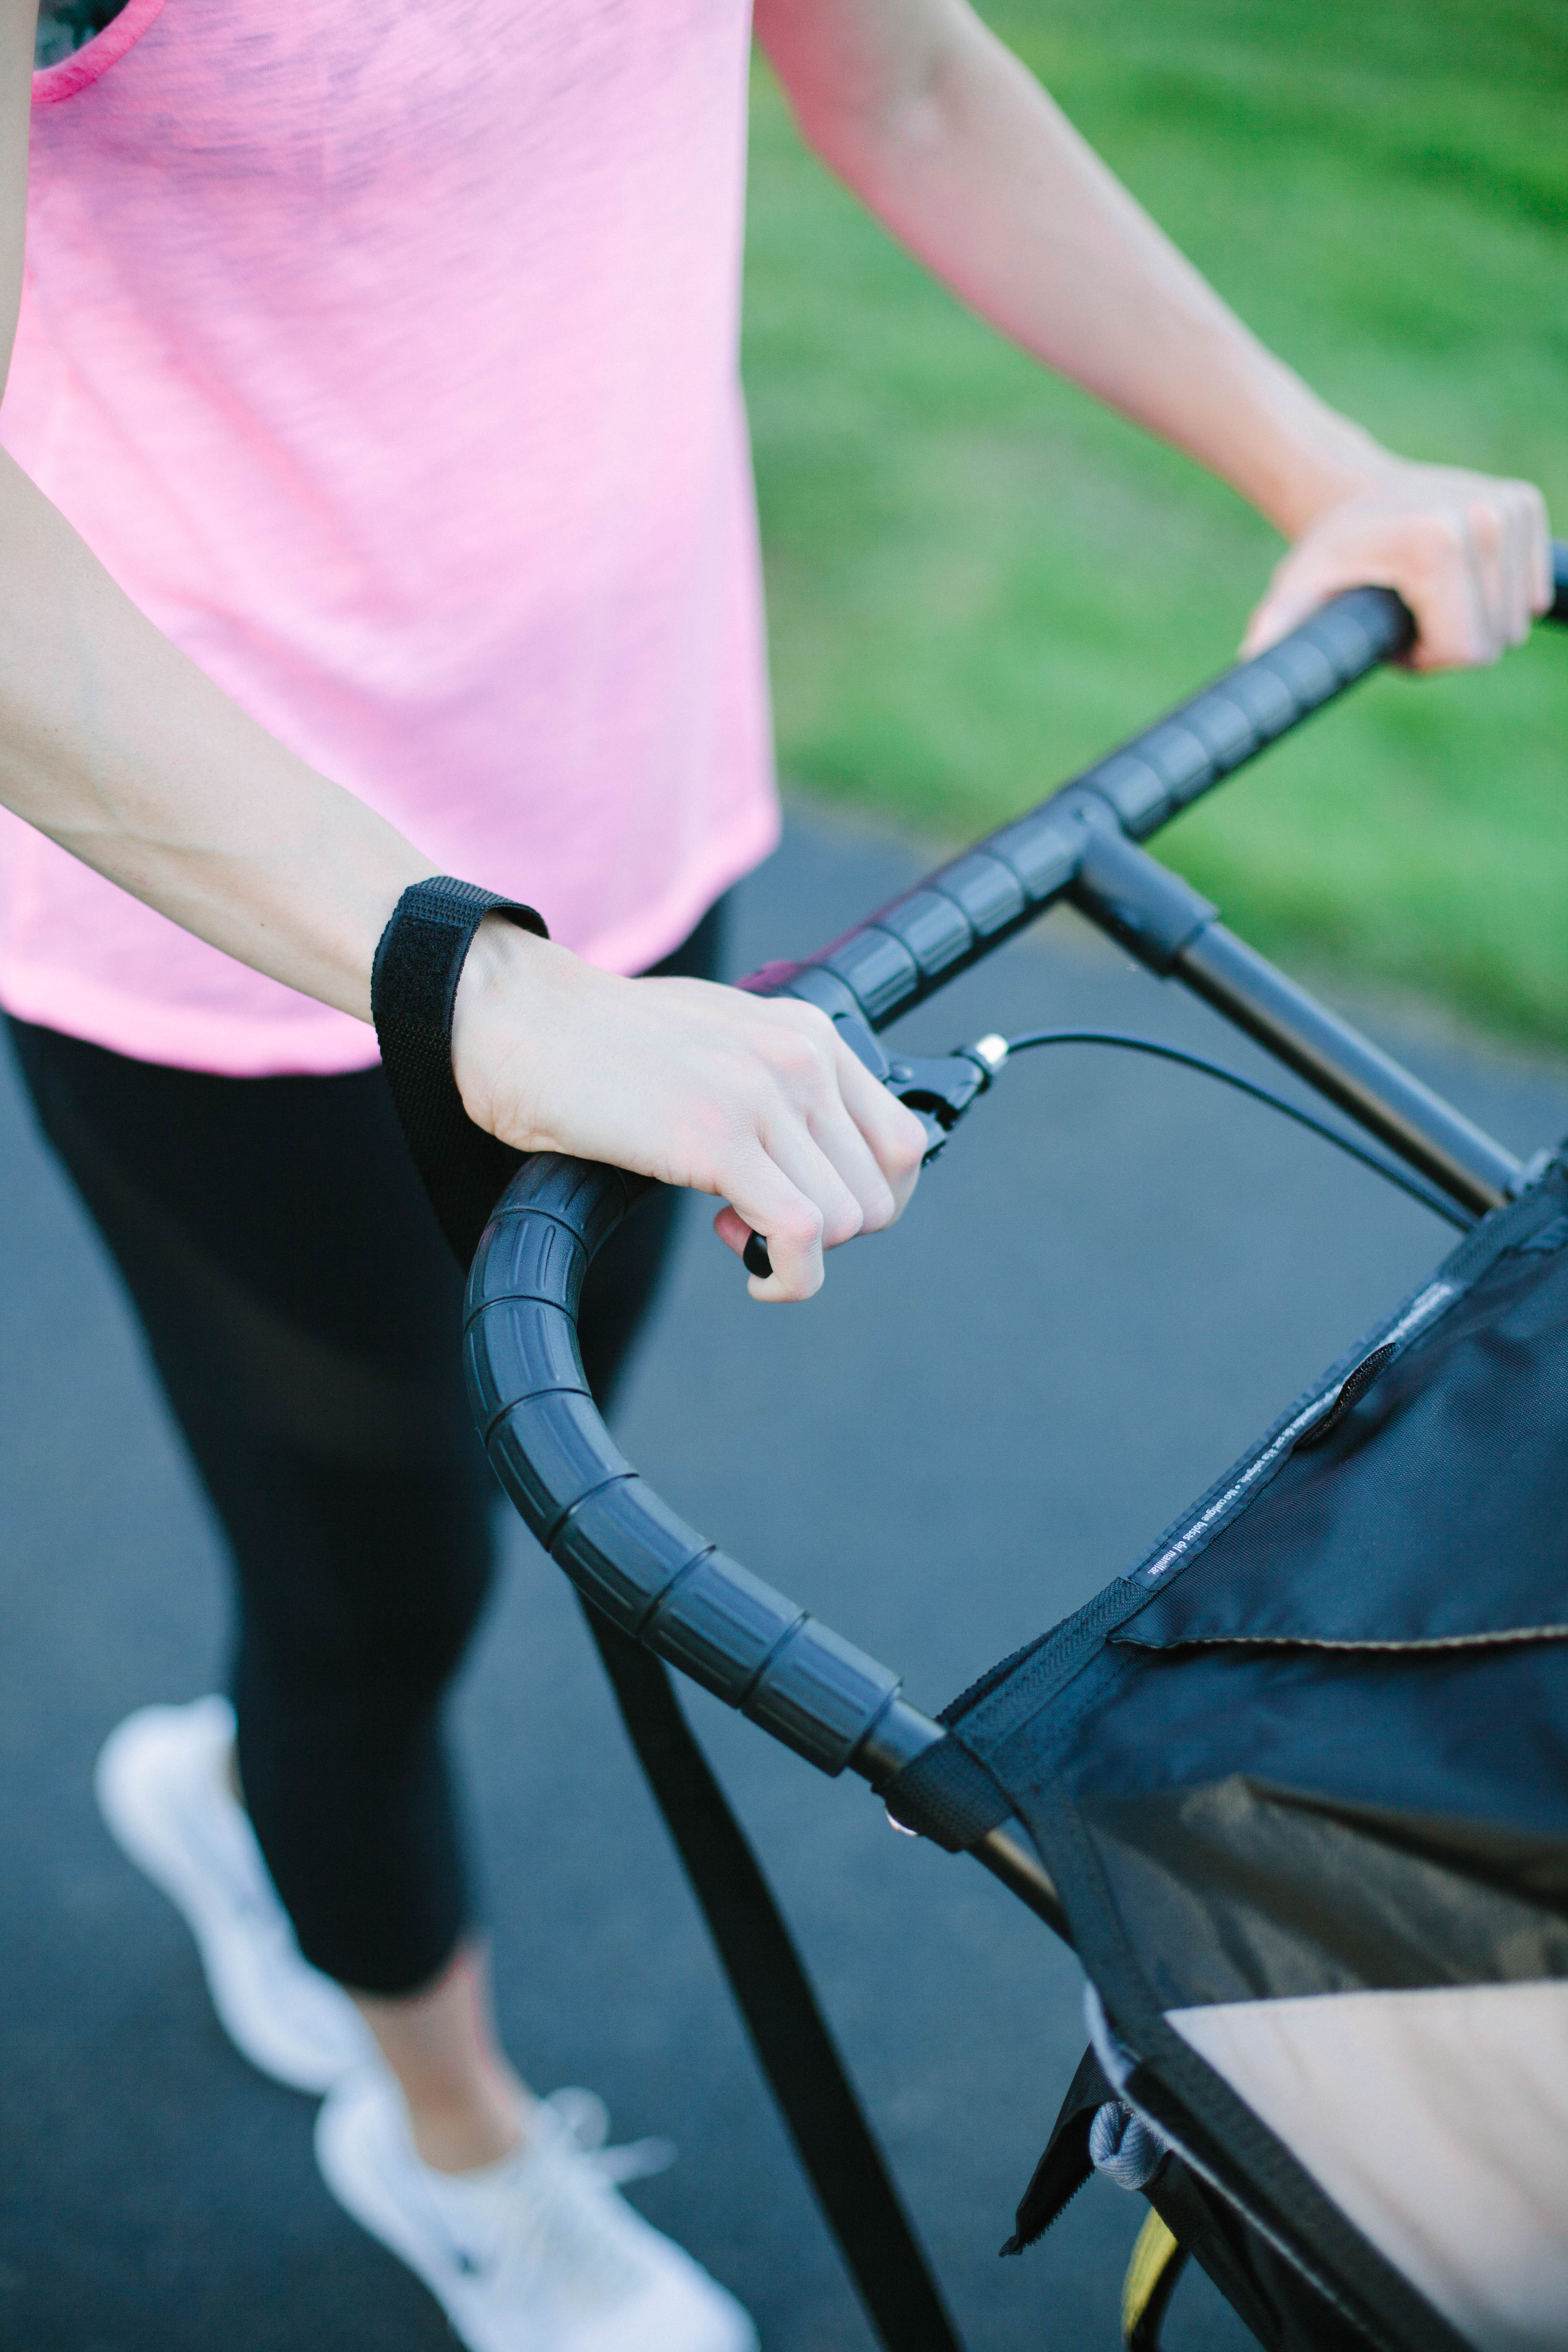 Busy mom? Not sure how to fit exercise into your busy routine? Check out these tips on how to find time to workout, especially if you have kids!